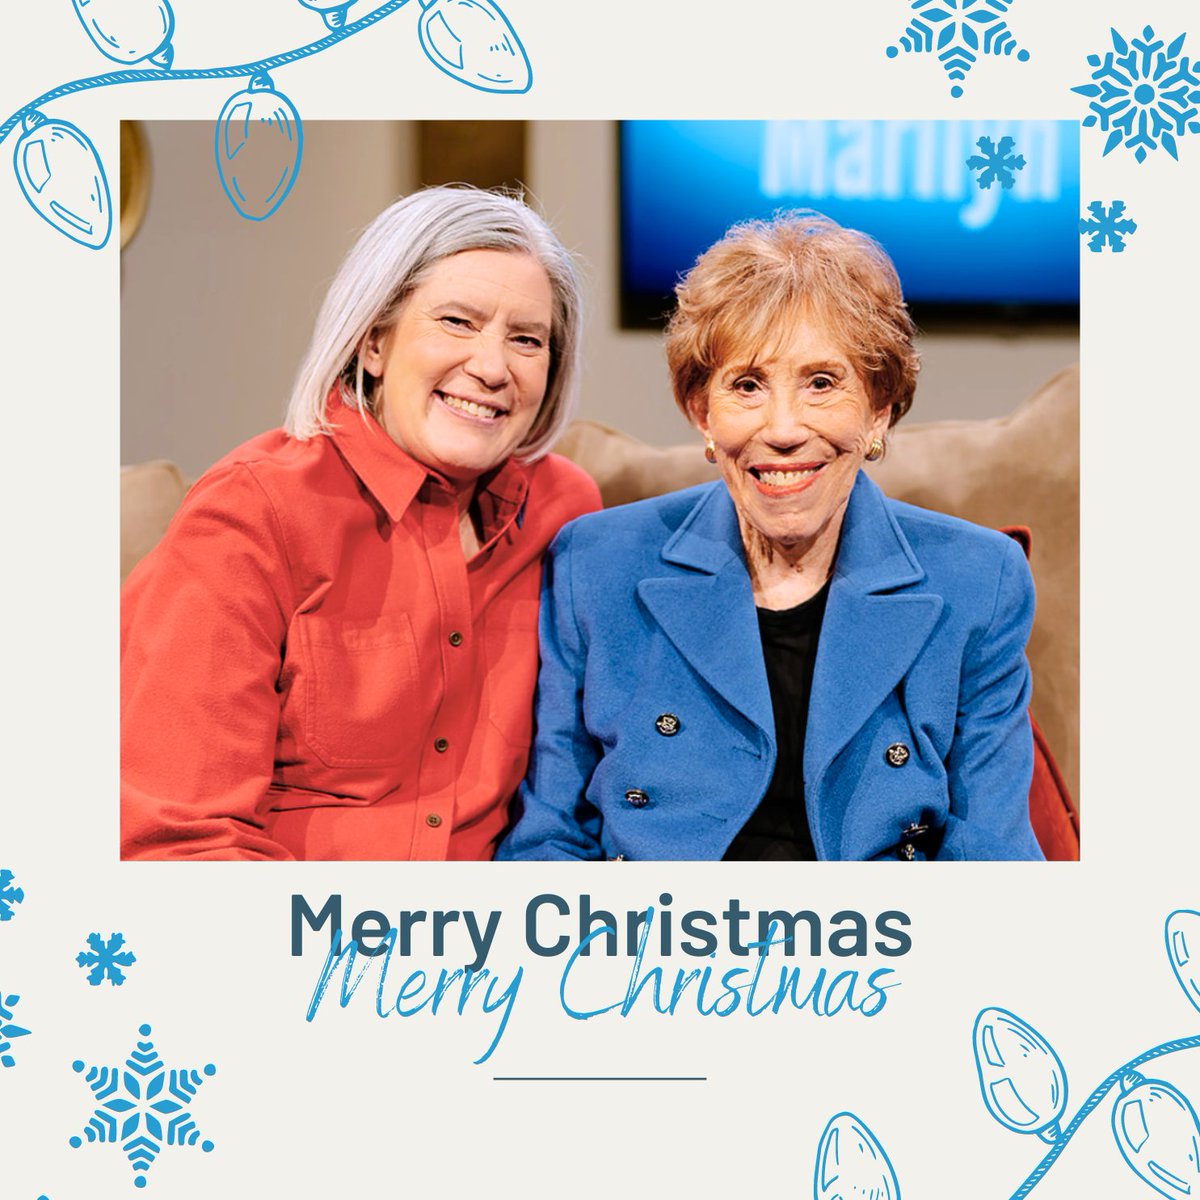 Merry Christmas from @marilynhickeyministries and I.
-
-
#jesuschrist #bibleverse #christianity #biblestudy #jesuslovesyou #jesussaves #faithful #trustgod #faithoverfear #biblequotes #biblejournaling #christianblogger #christianquotes #foryou #christmas #holidays #merrychristmas